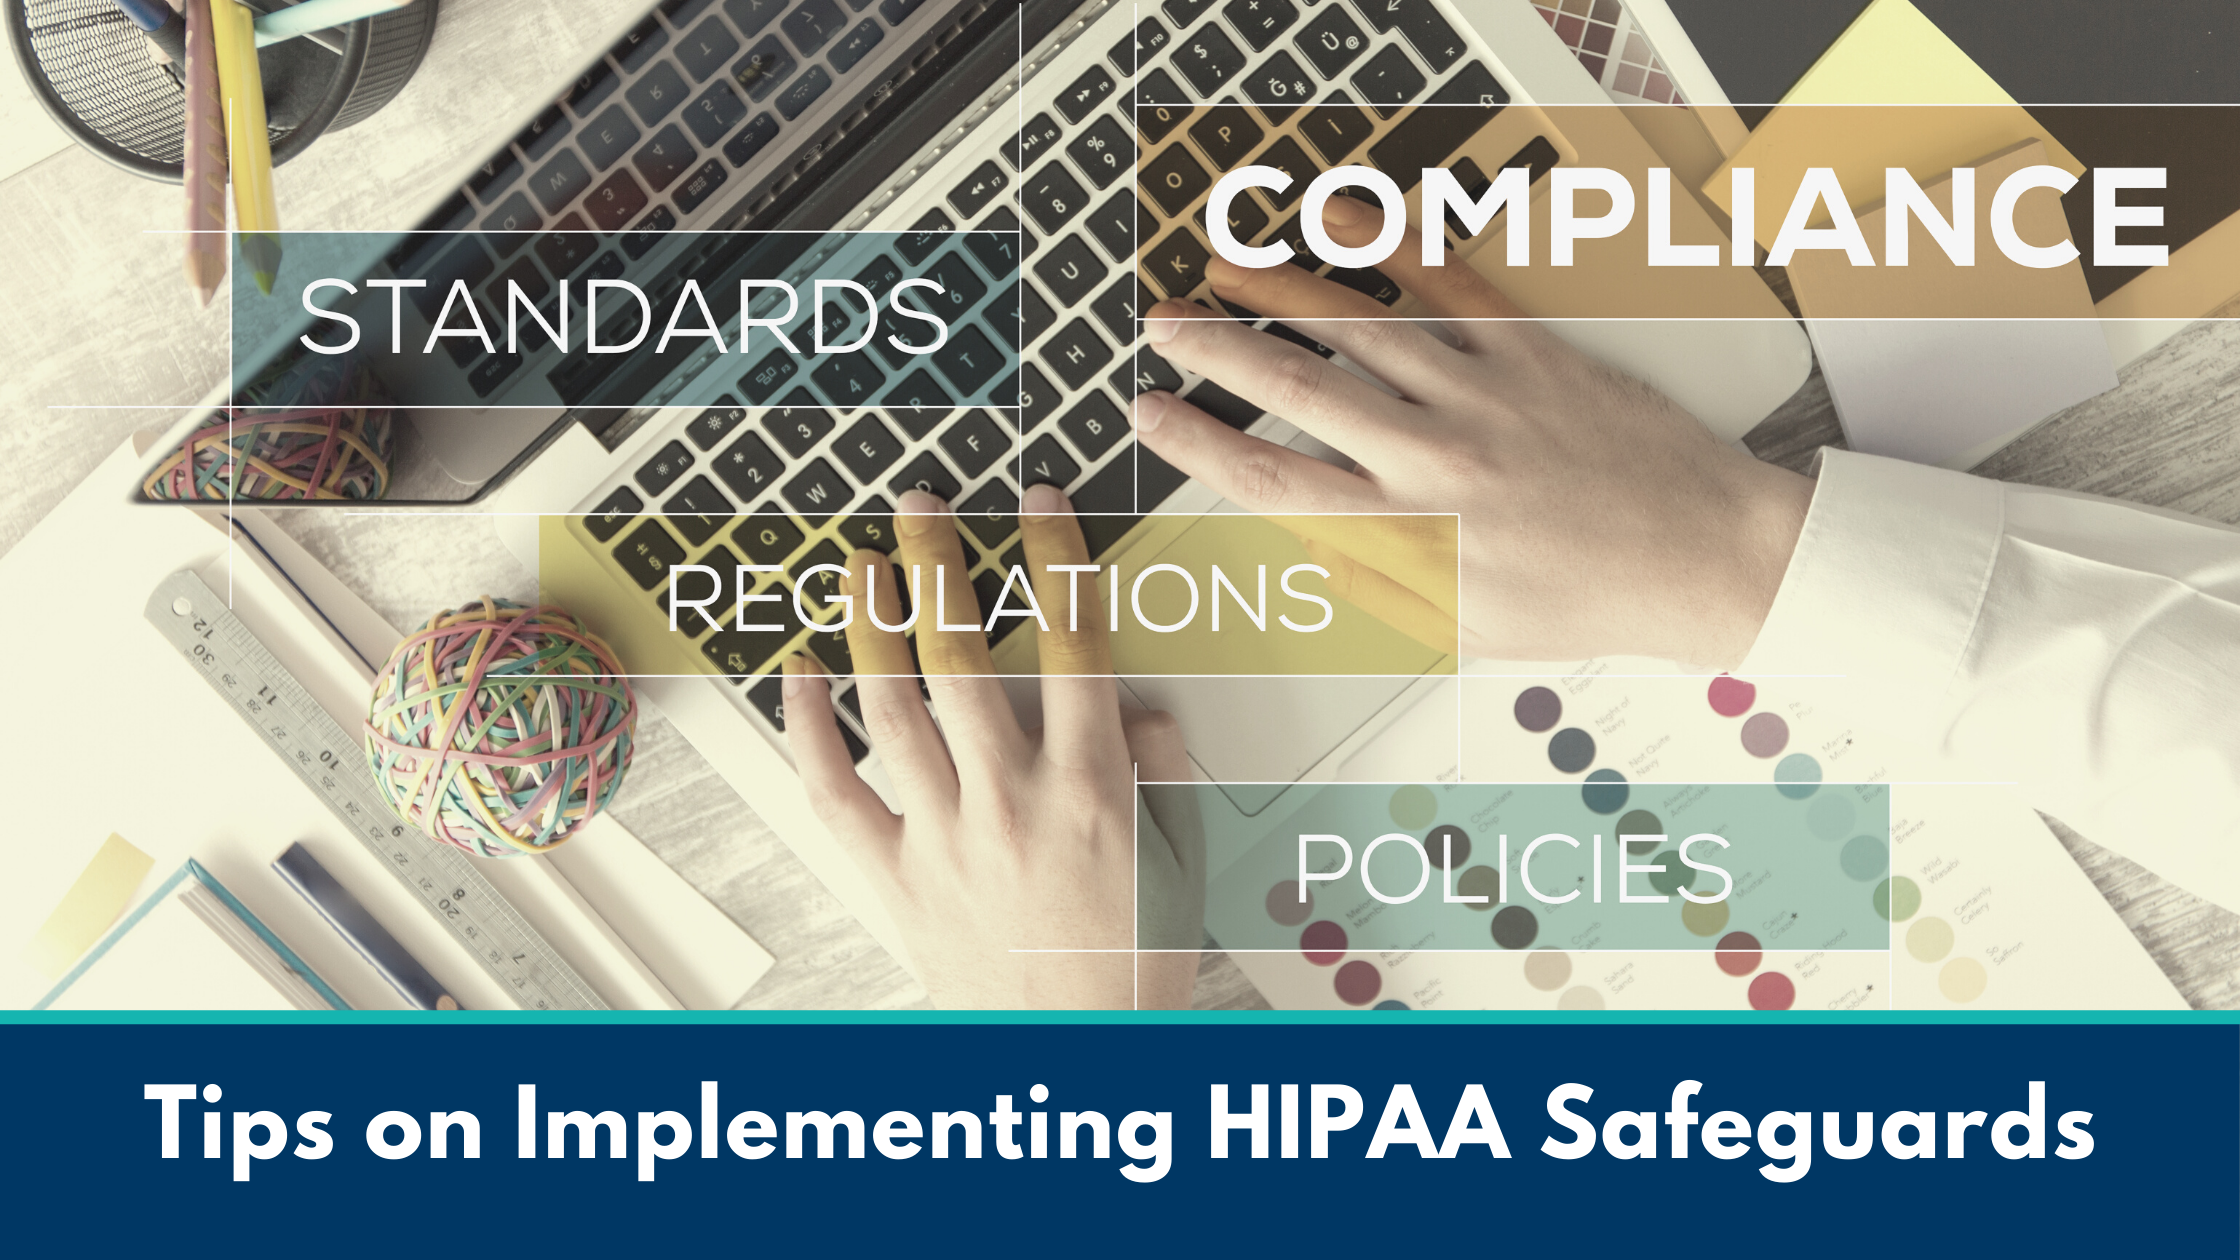 Tips on Implementing HIPAA Safeguards